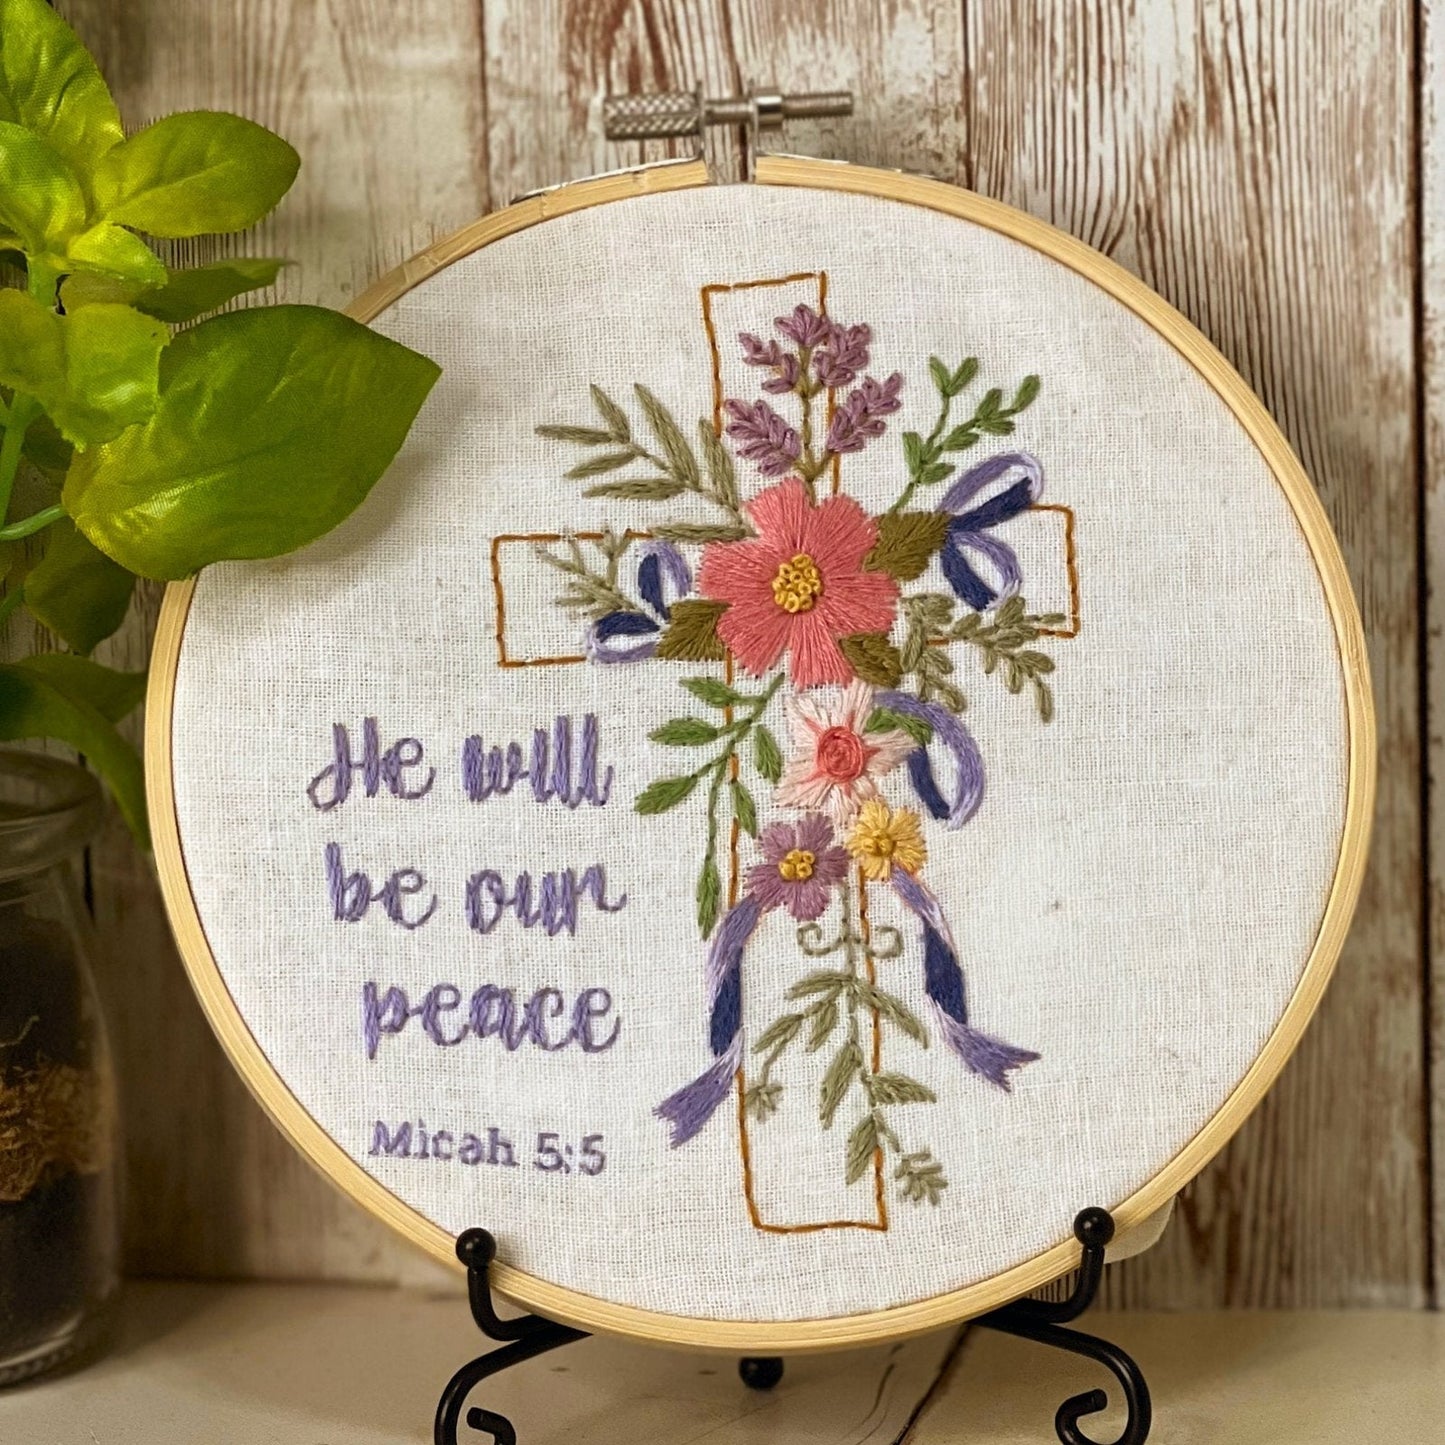 6" Floral Cross with Christian Scripture Embroidery Kit